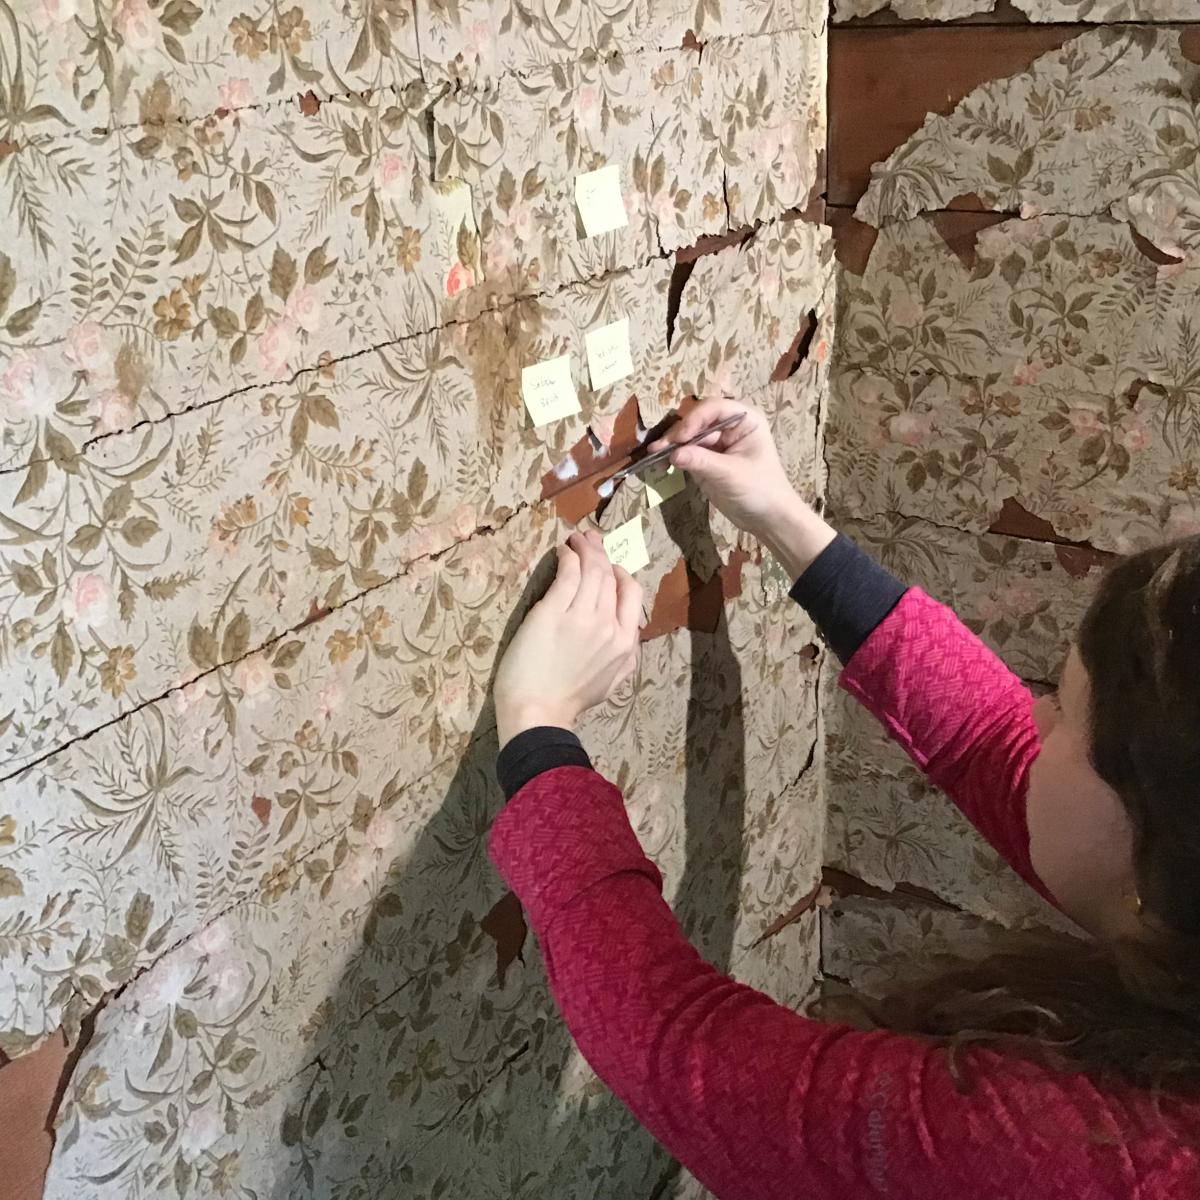 Hilary LeFevere is sitting on the floor, adhering small pieces of Japanese tissue to the original wall boards, using sticky notes to label different materials.